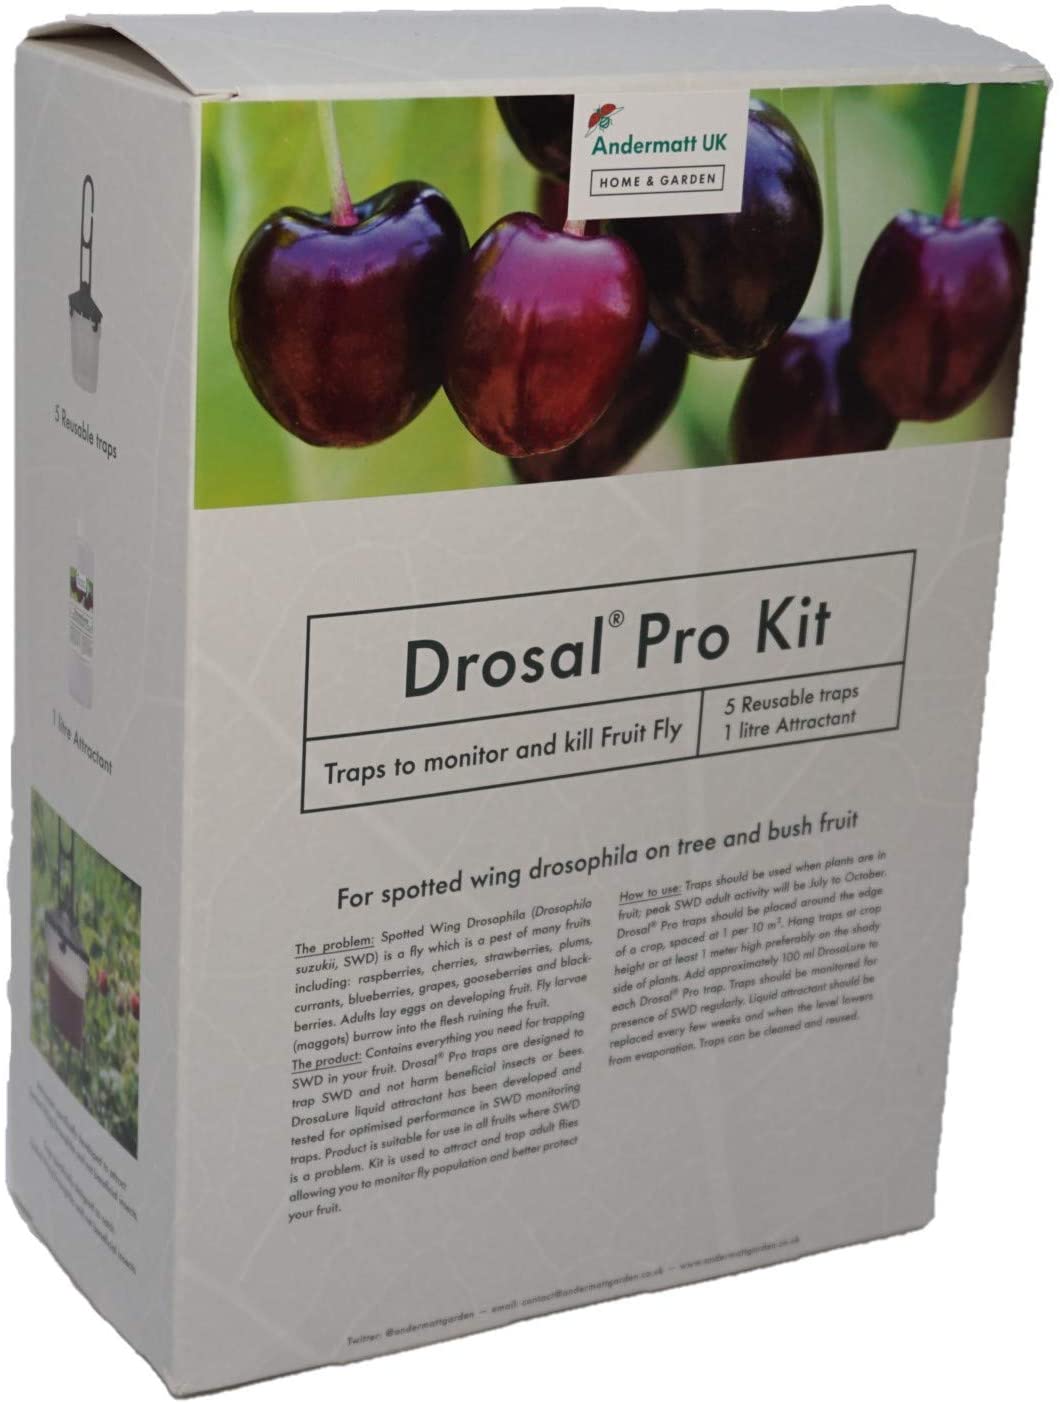 Photo of a packaged Drosal Pro Kit.